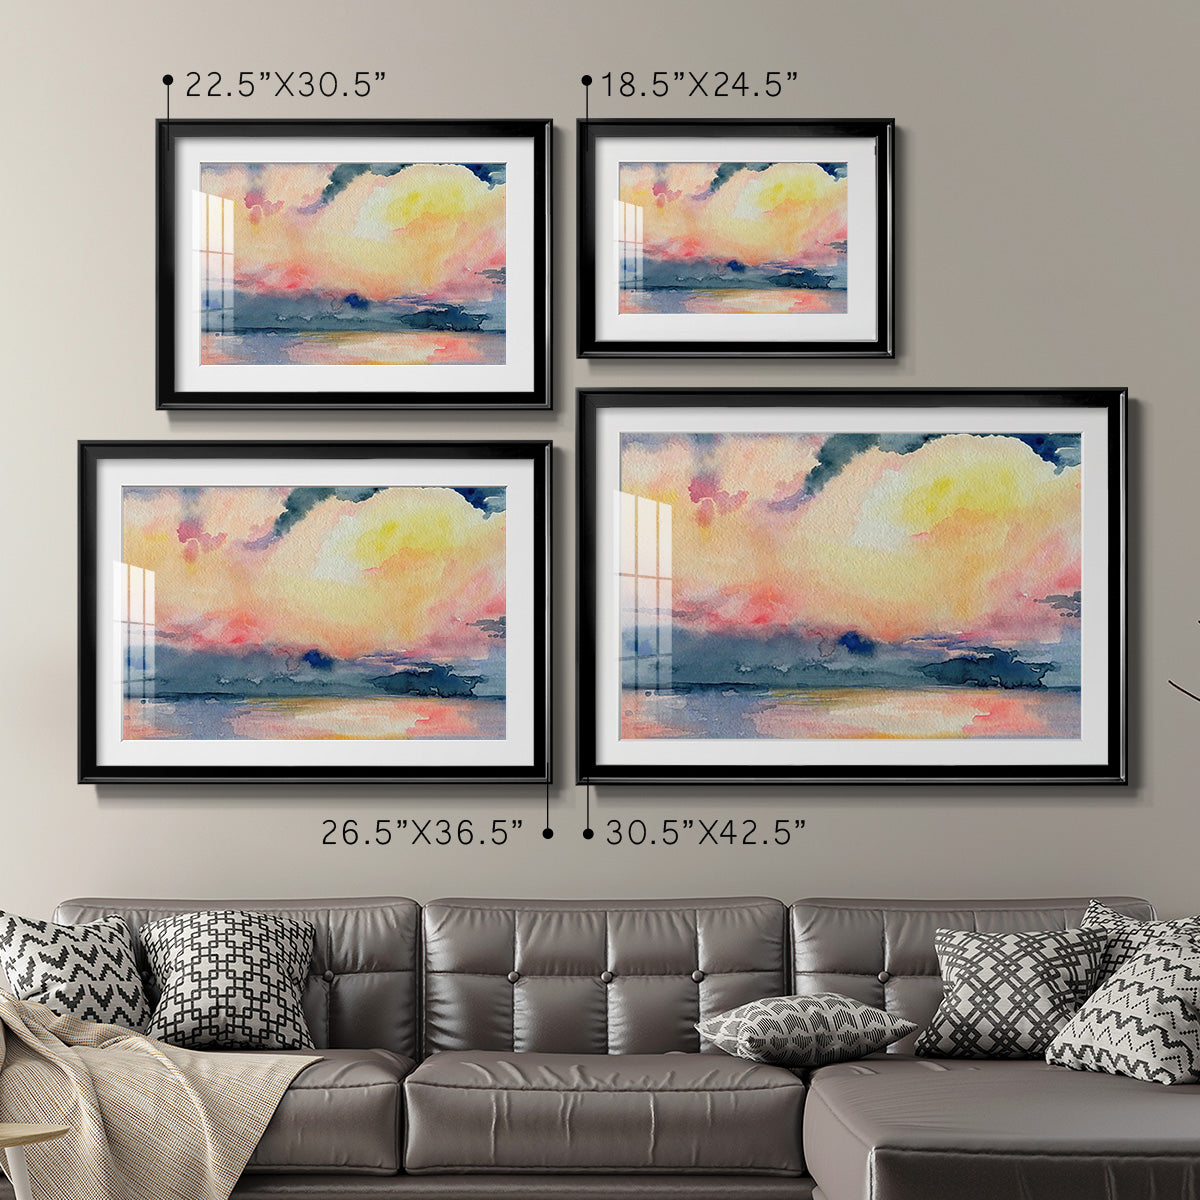 Prism Seascape III Premium Framed Print - Ready to Hang